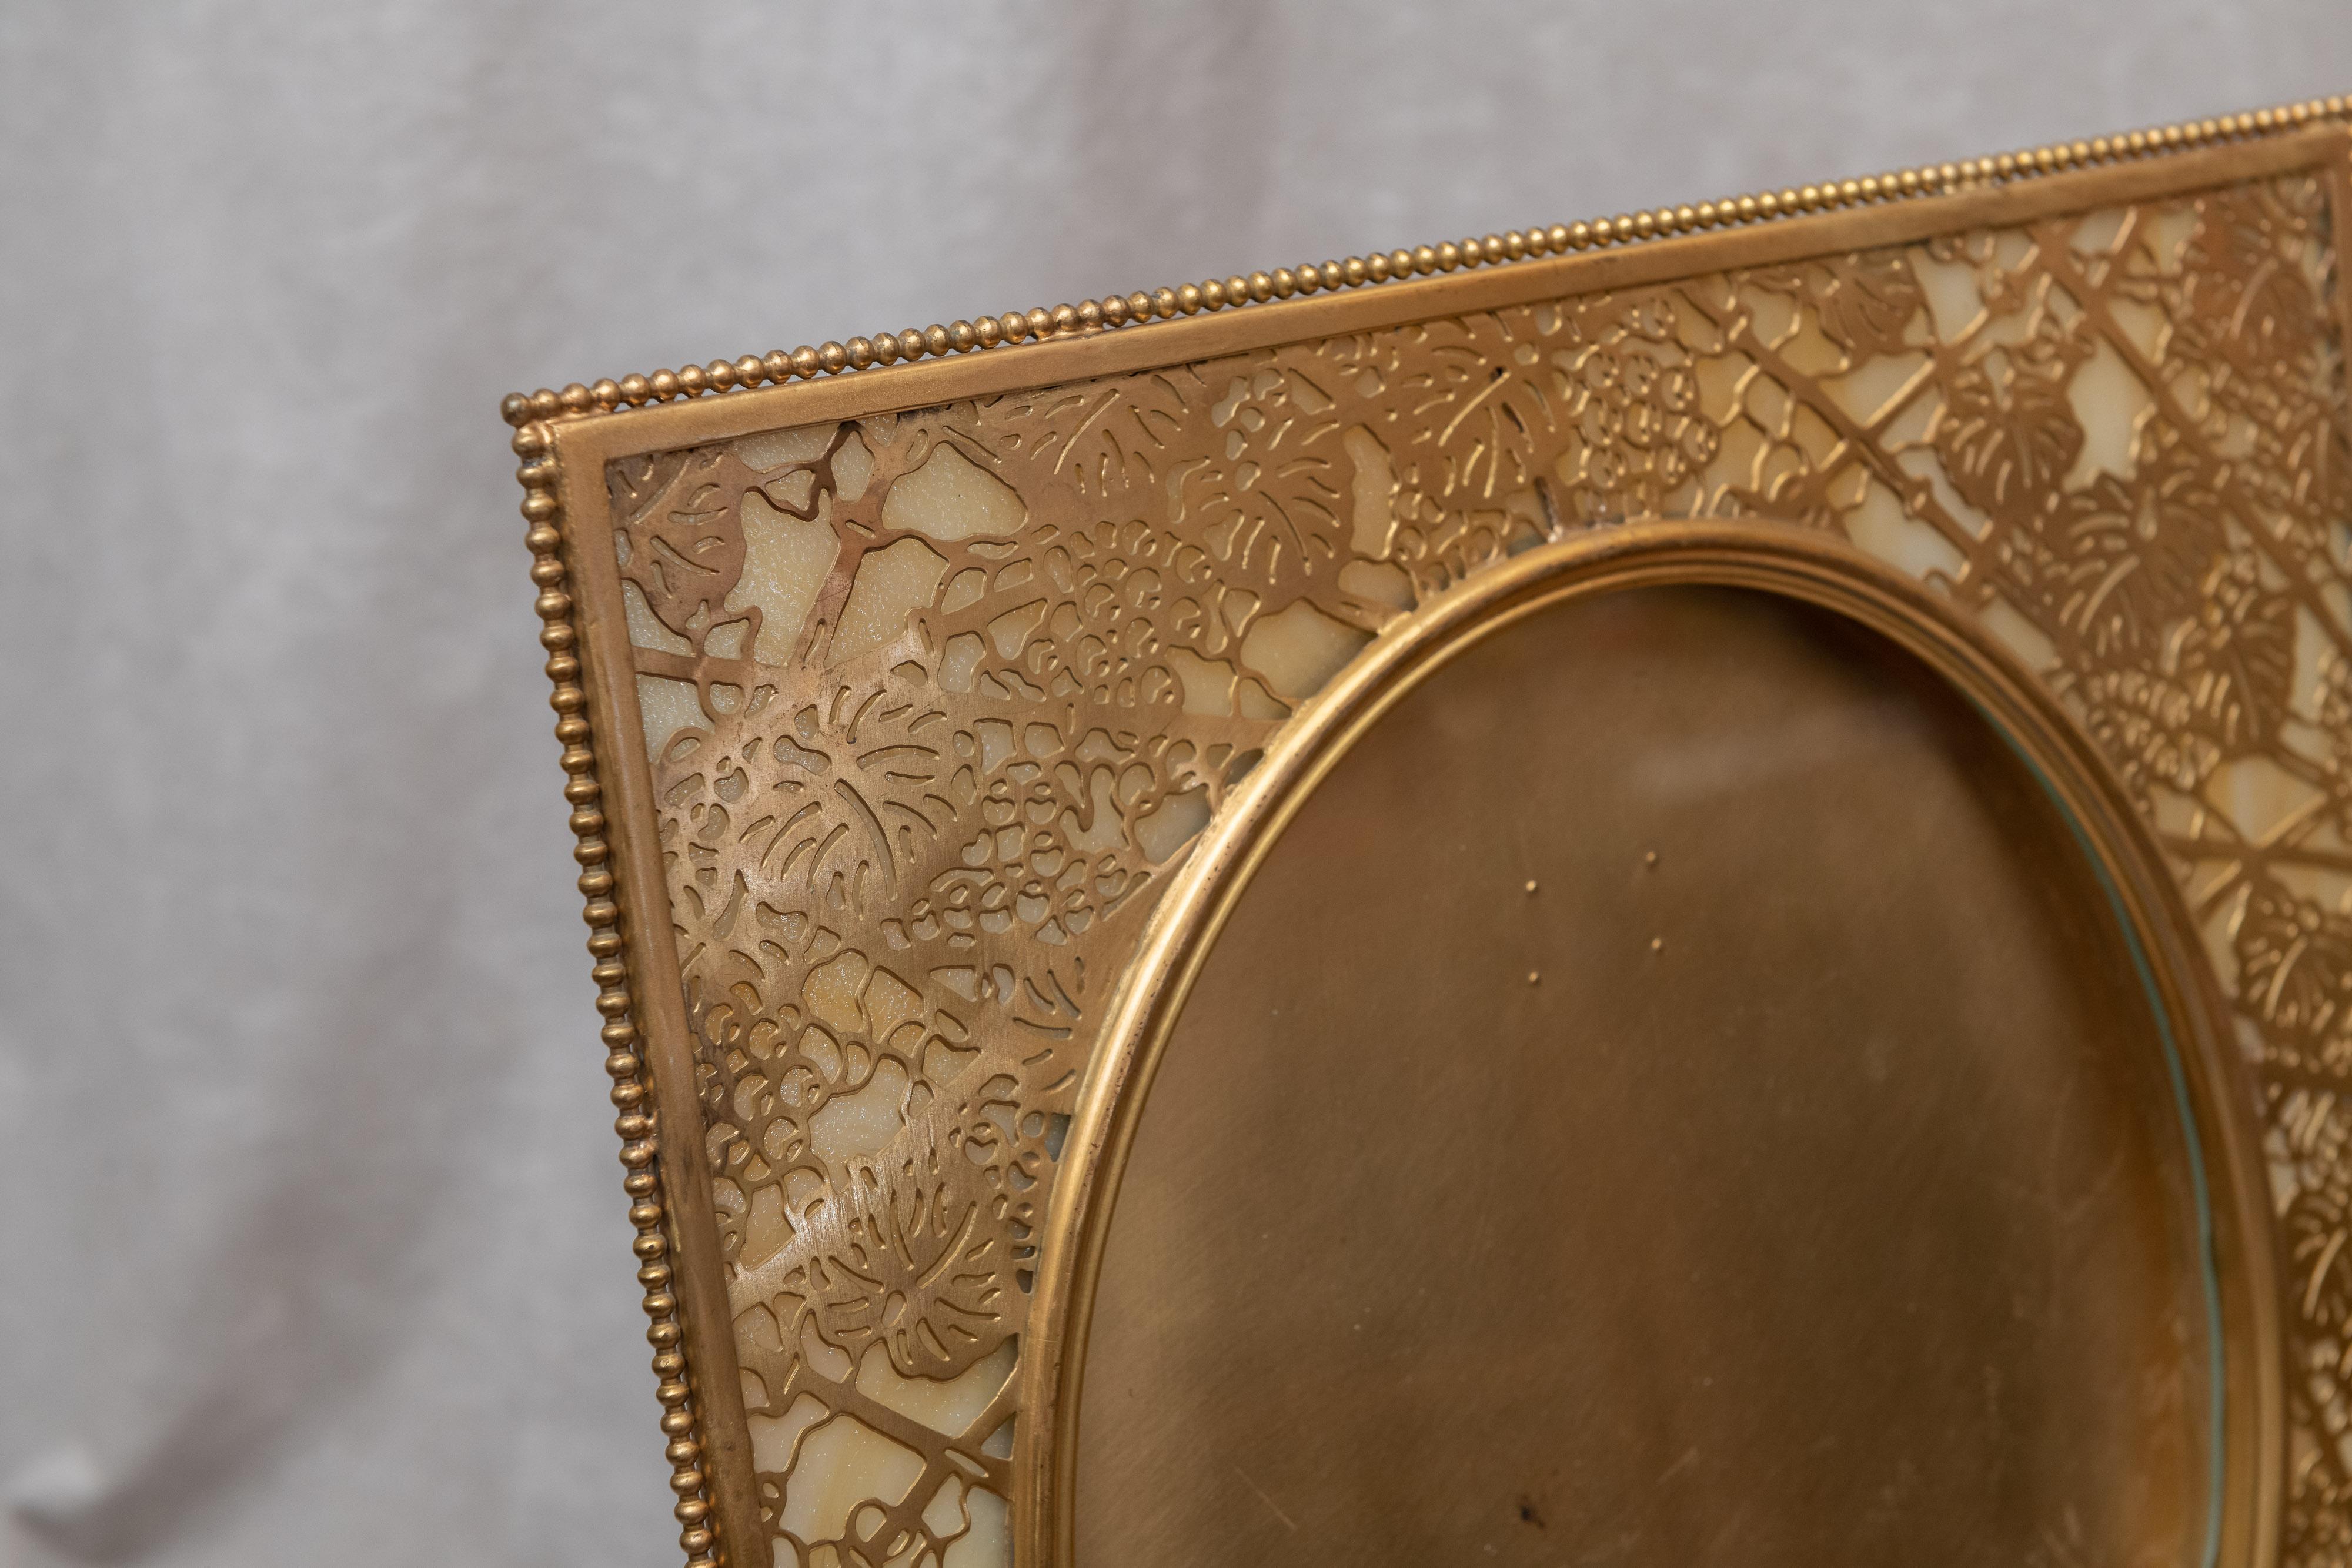 Early 20th Century Large Picture Frame, Signed Tiffany Studios, Gilt Finish, Grapevine Pattern 1905